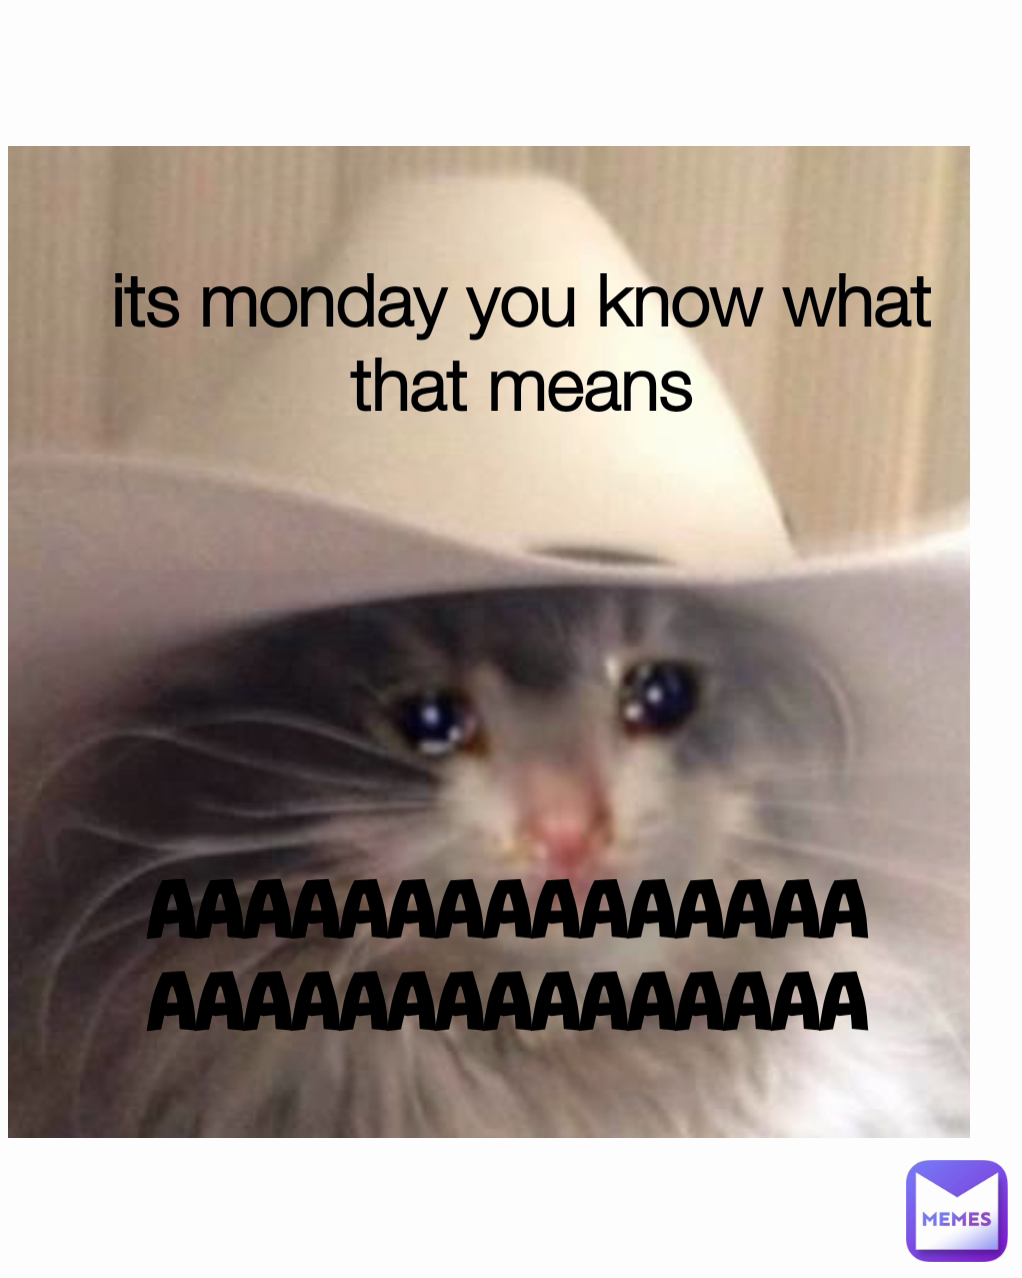 its monday you know what that means AAAAAAAAAAAAAAAAAAAAAAAAAAAAAA